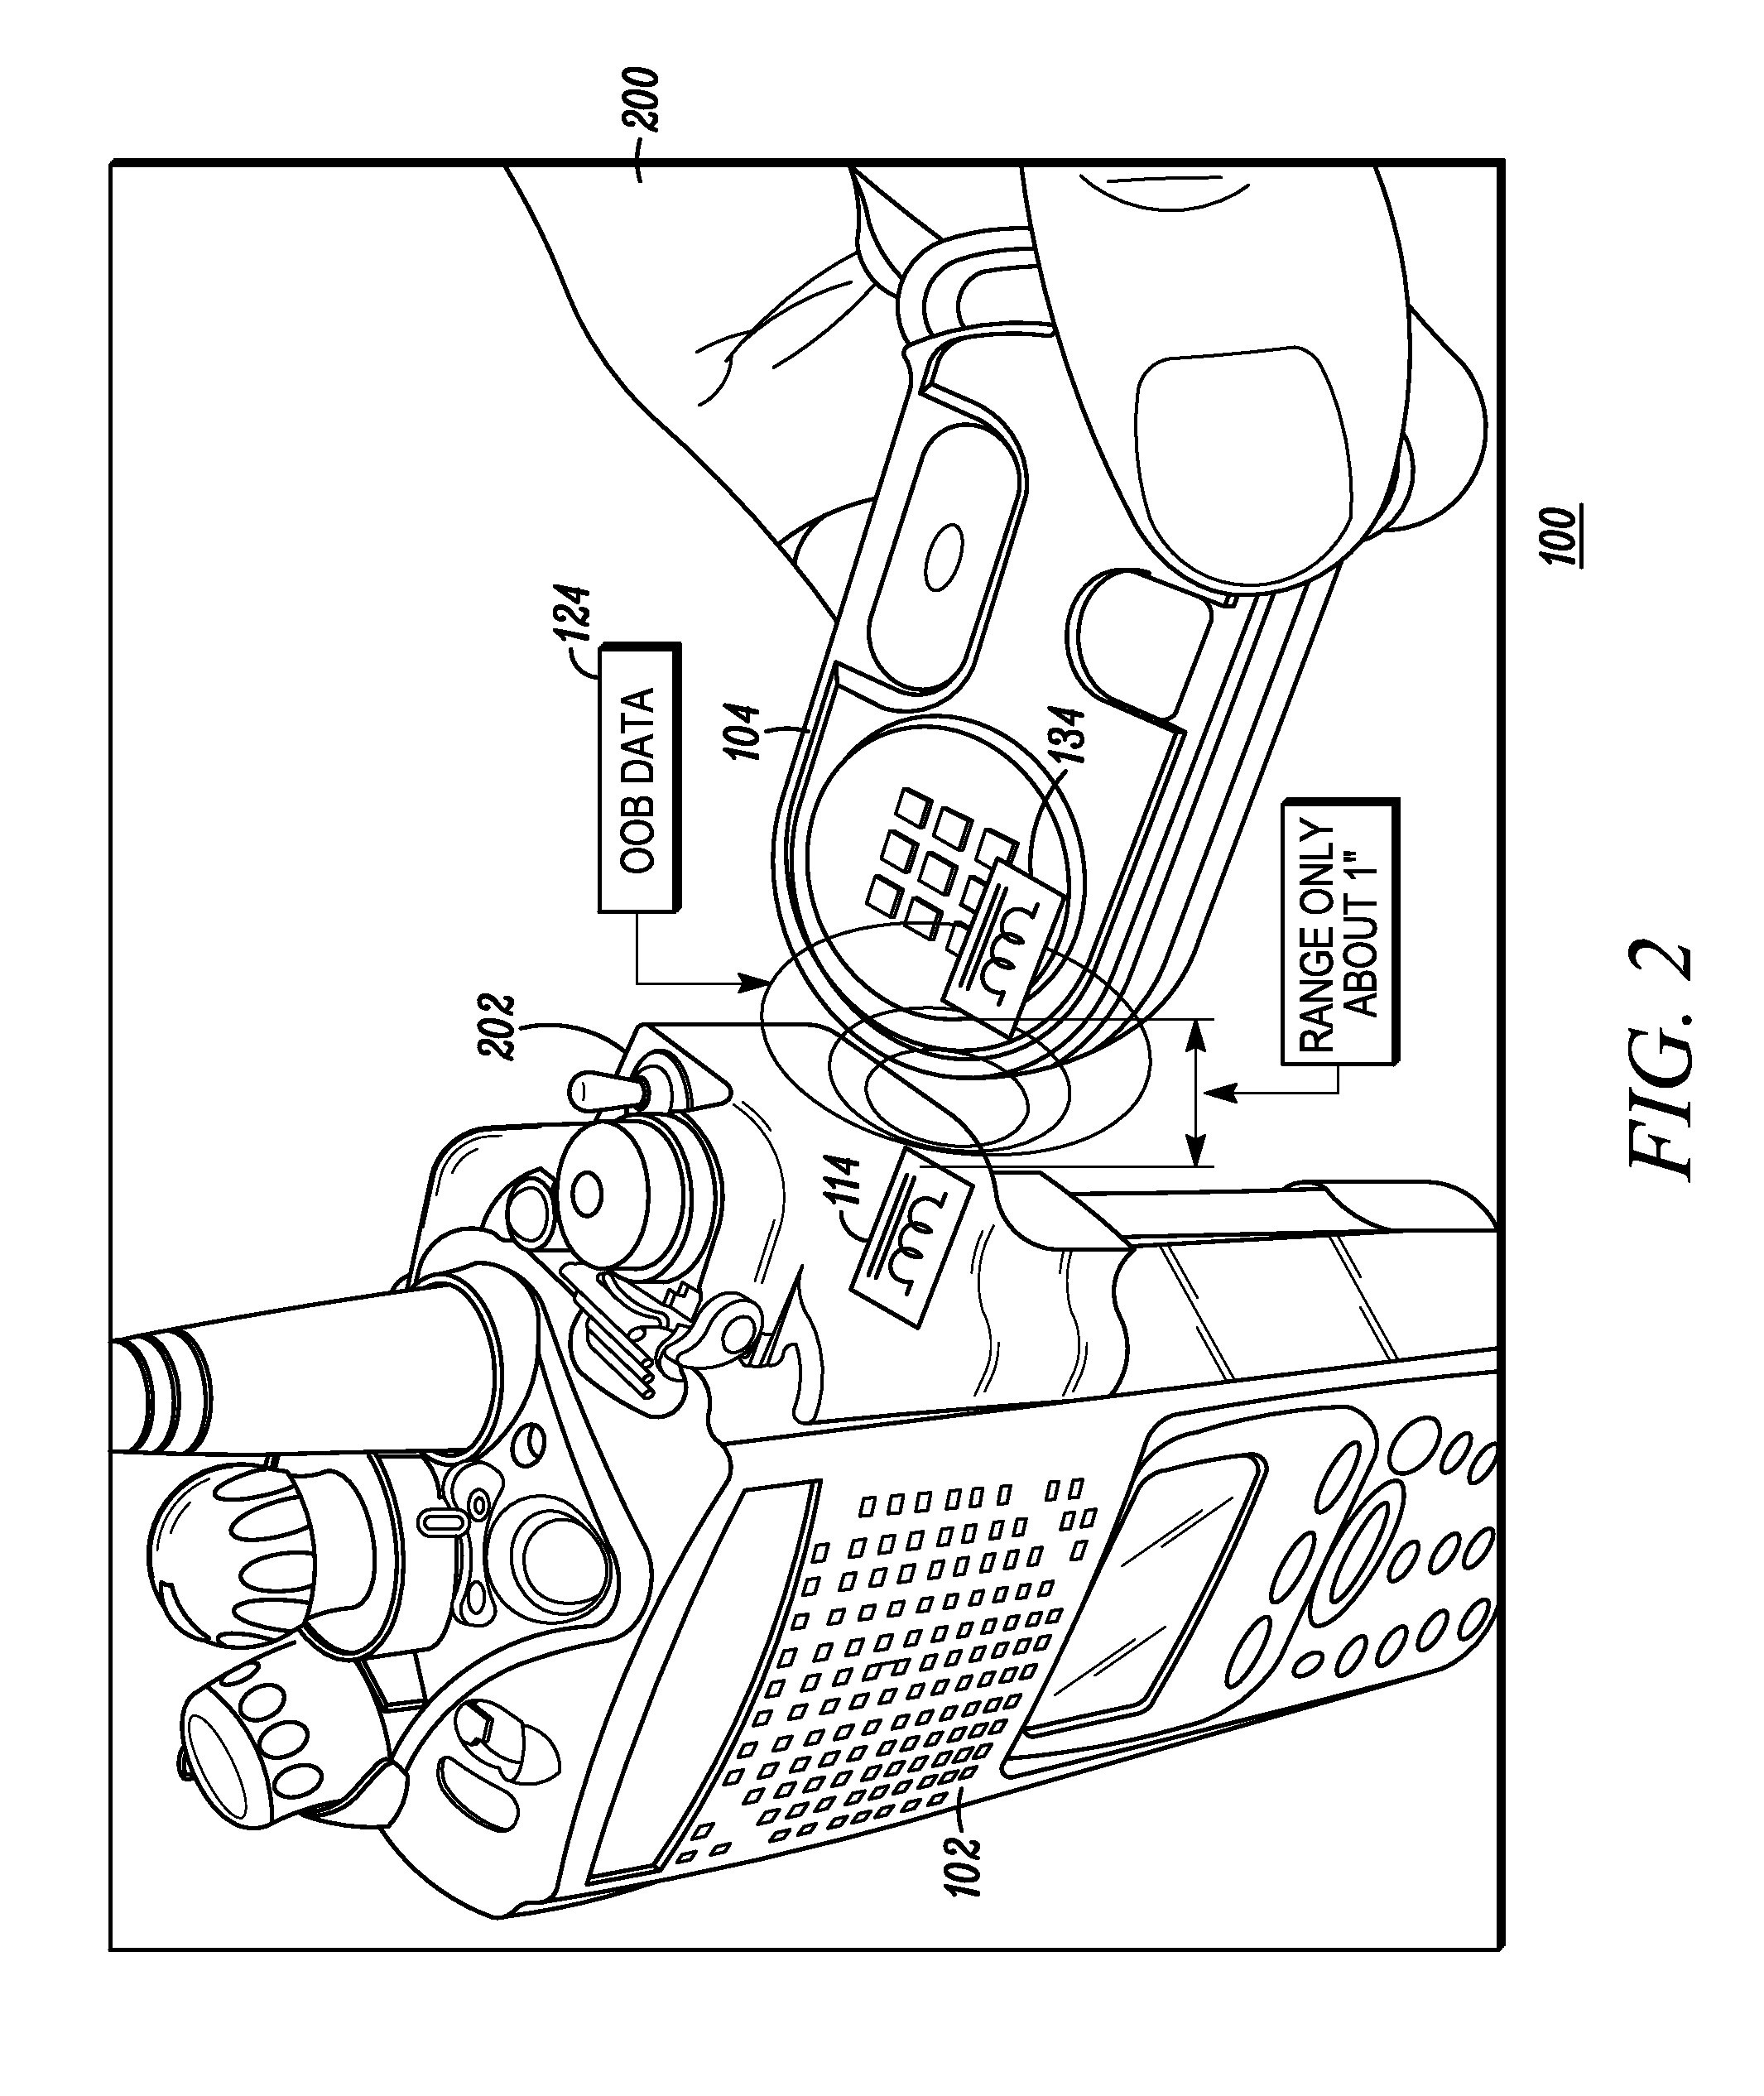 Method and system for near-field wireless device pairing